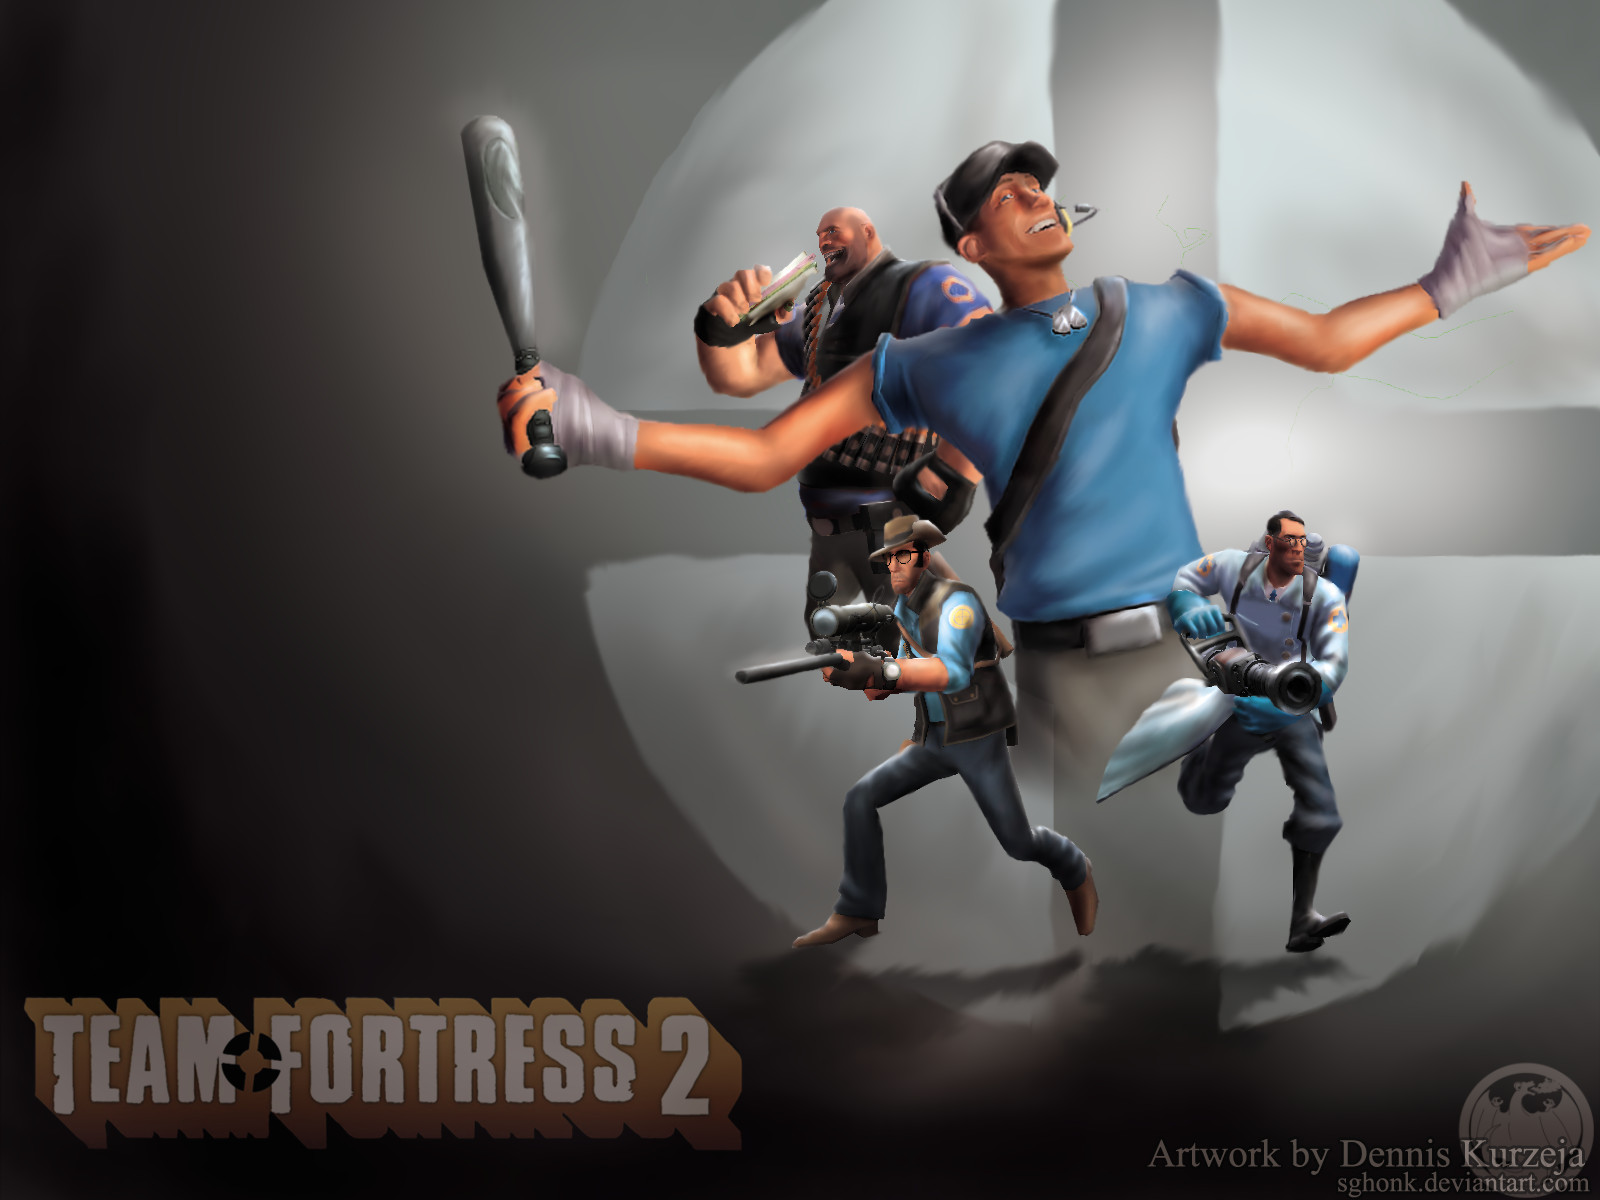 Here You Will Find A Nice Selection Of Tf2 Wallpaper To Just